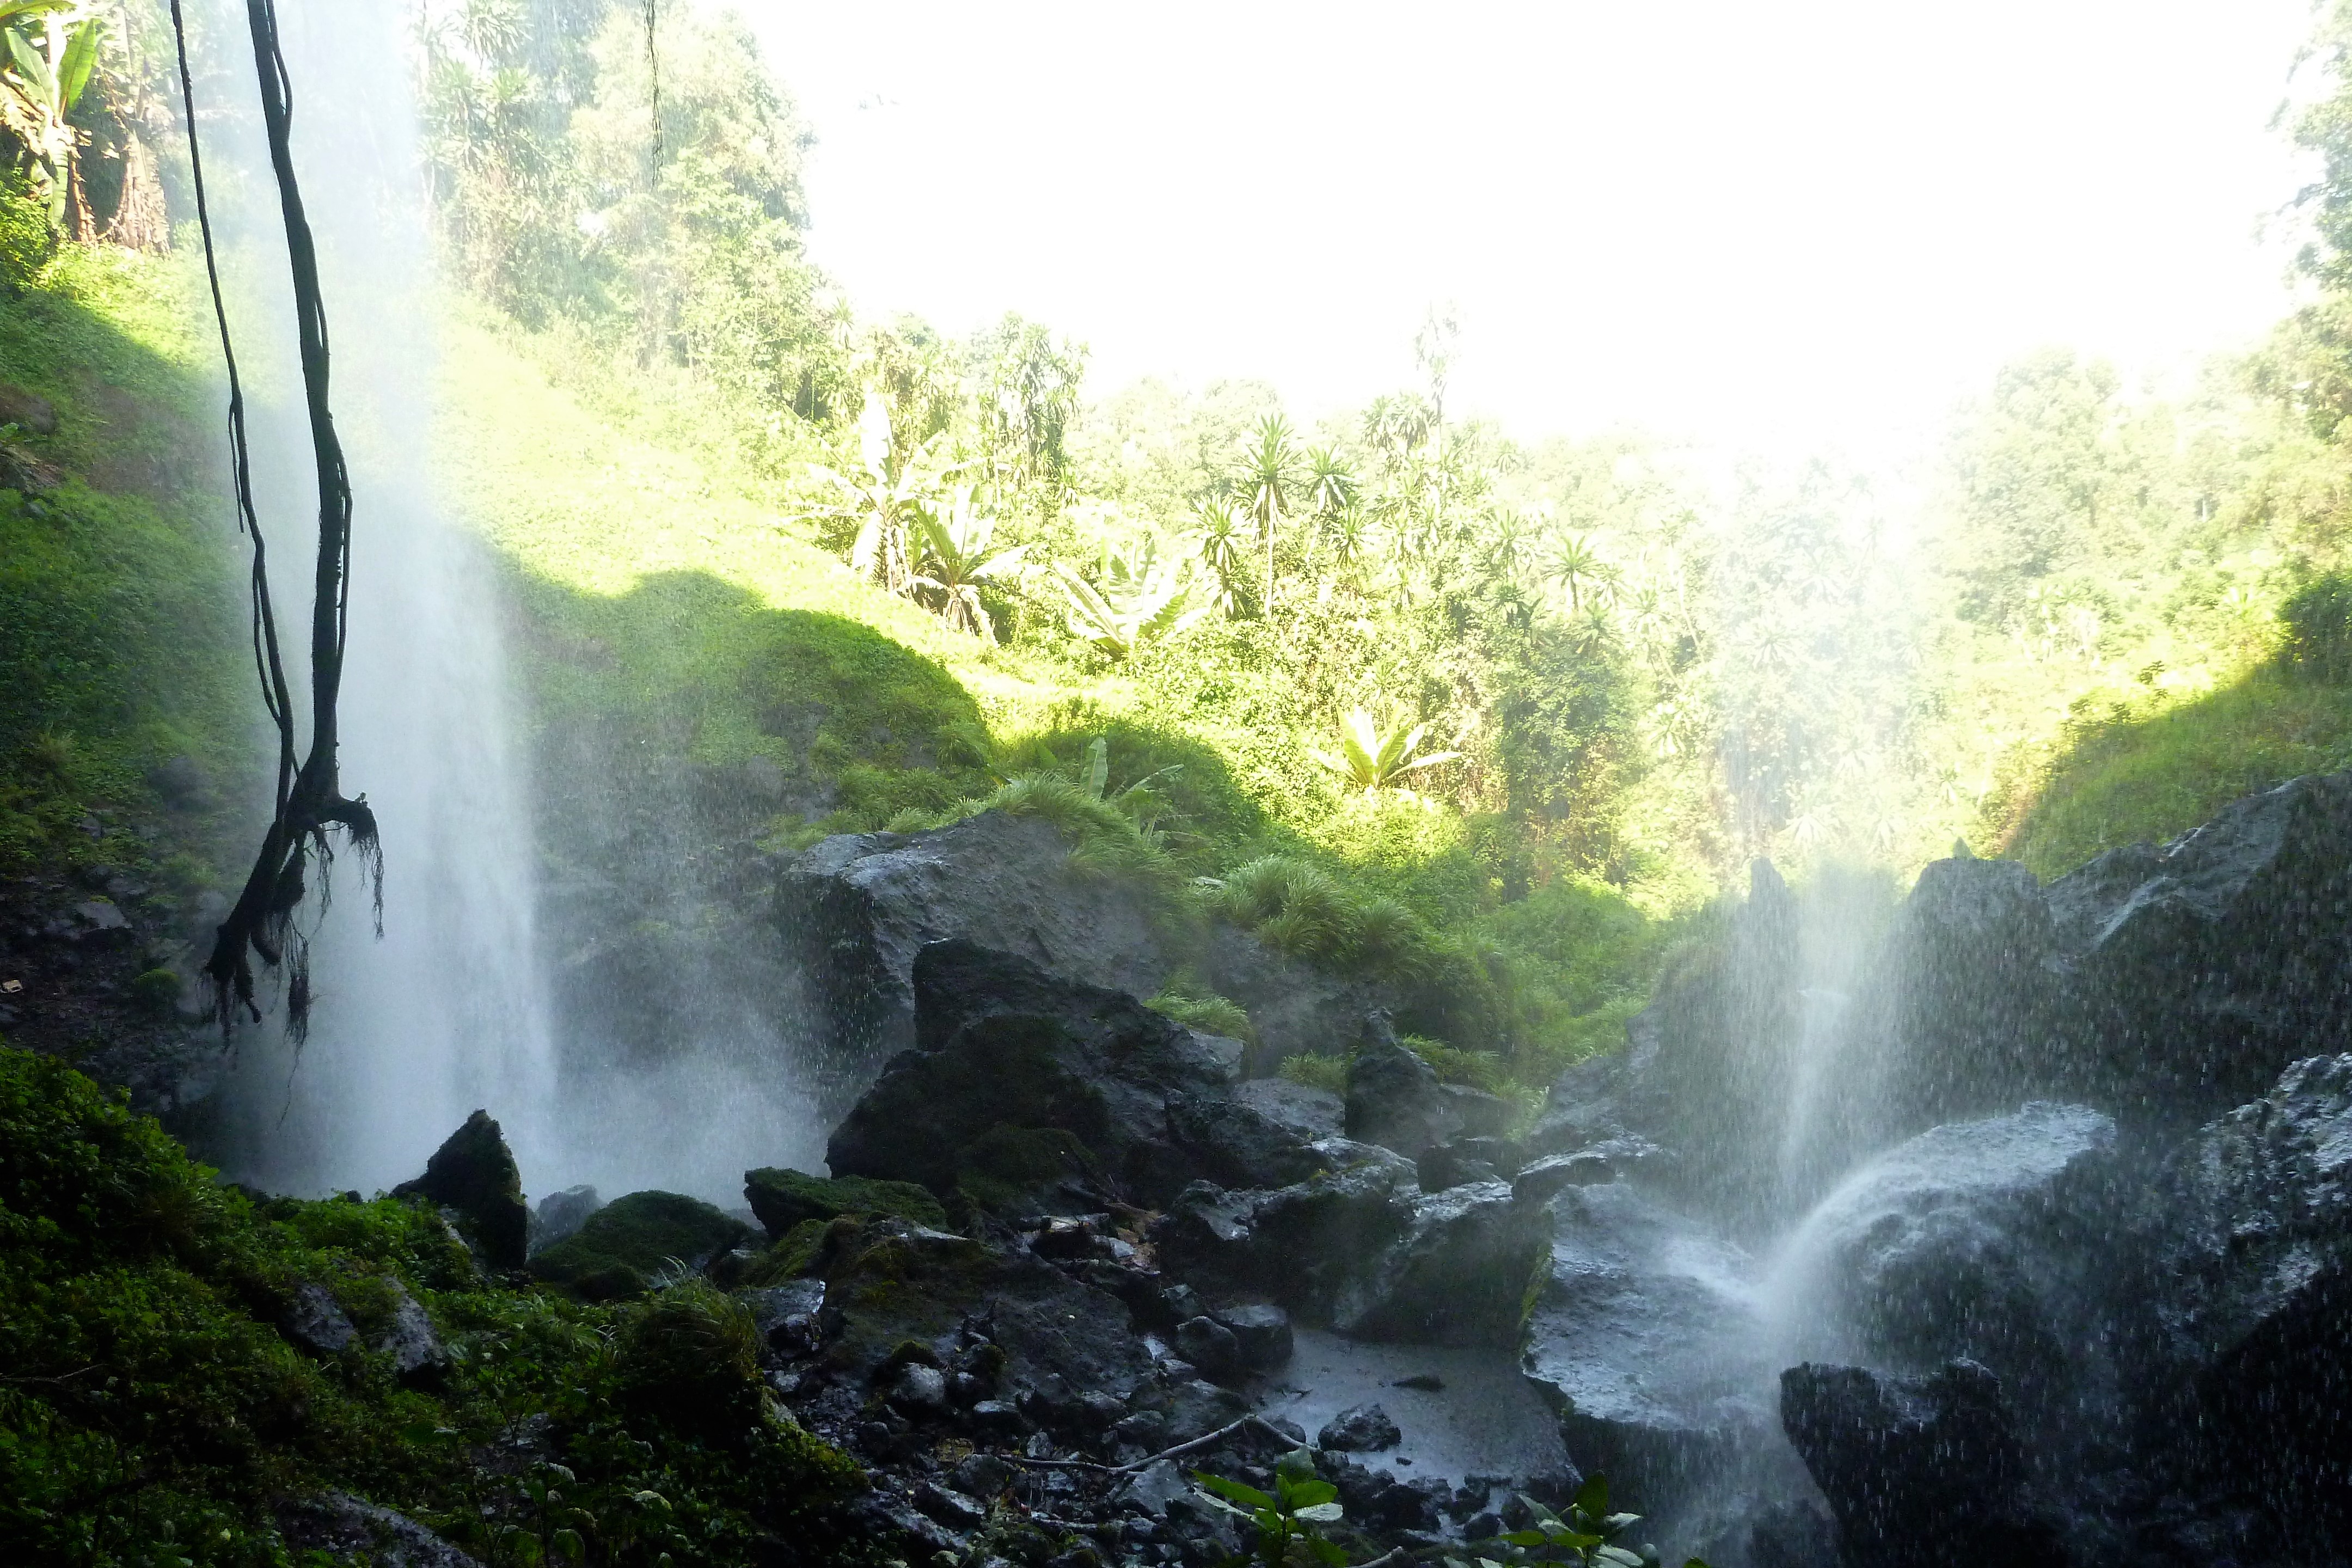 8 Days Mountain Elgon Hike in Uganda | Things to do in Mountain Elgon national park - Sipi Trail on Mount Elgon